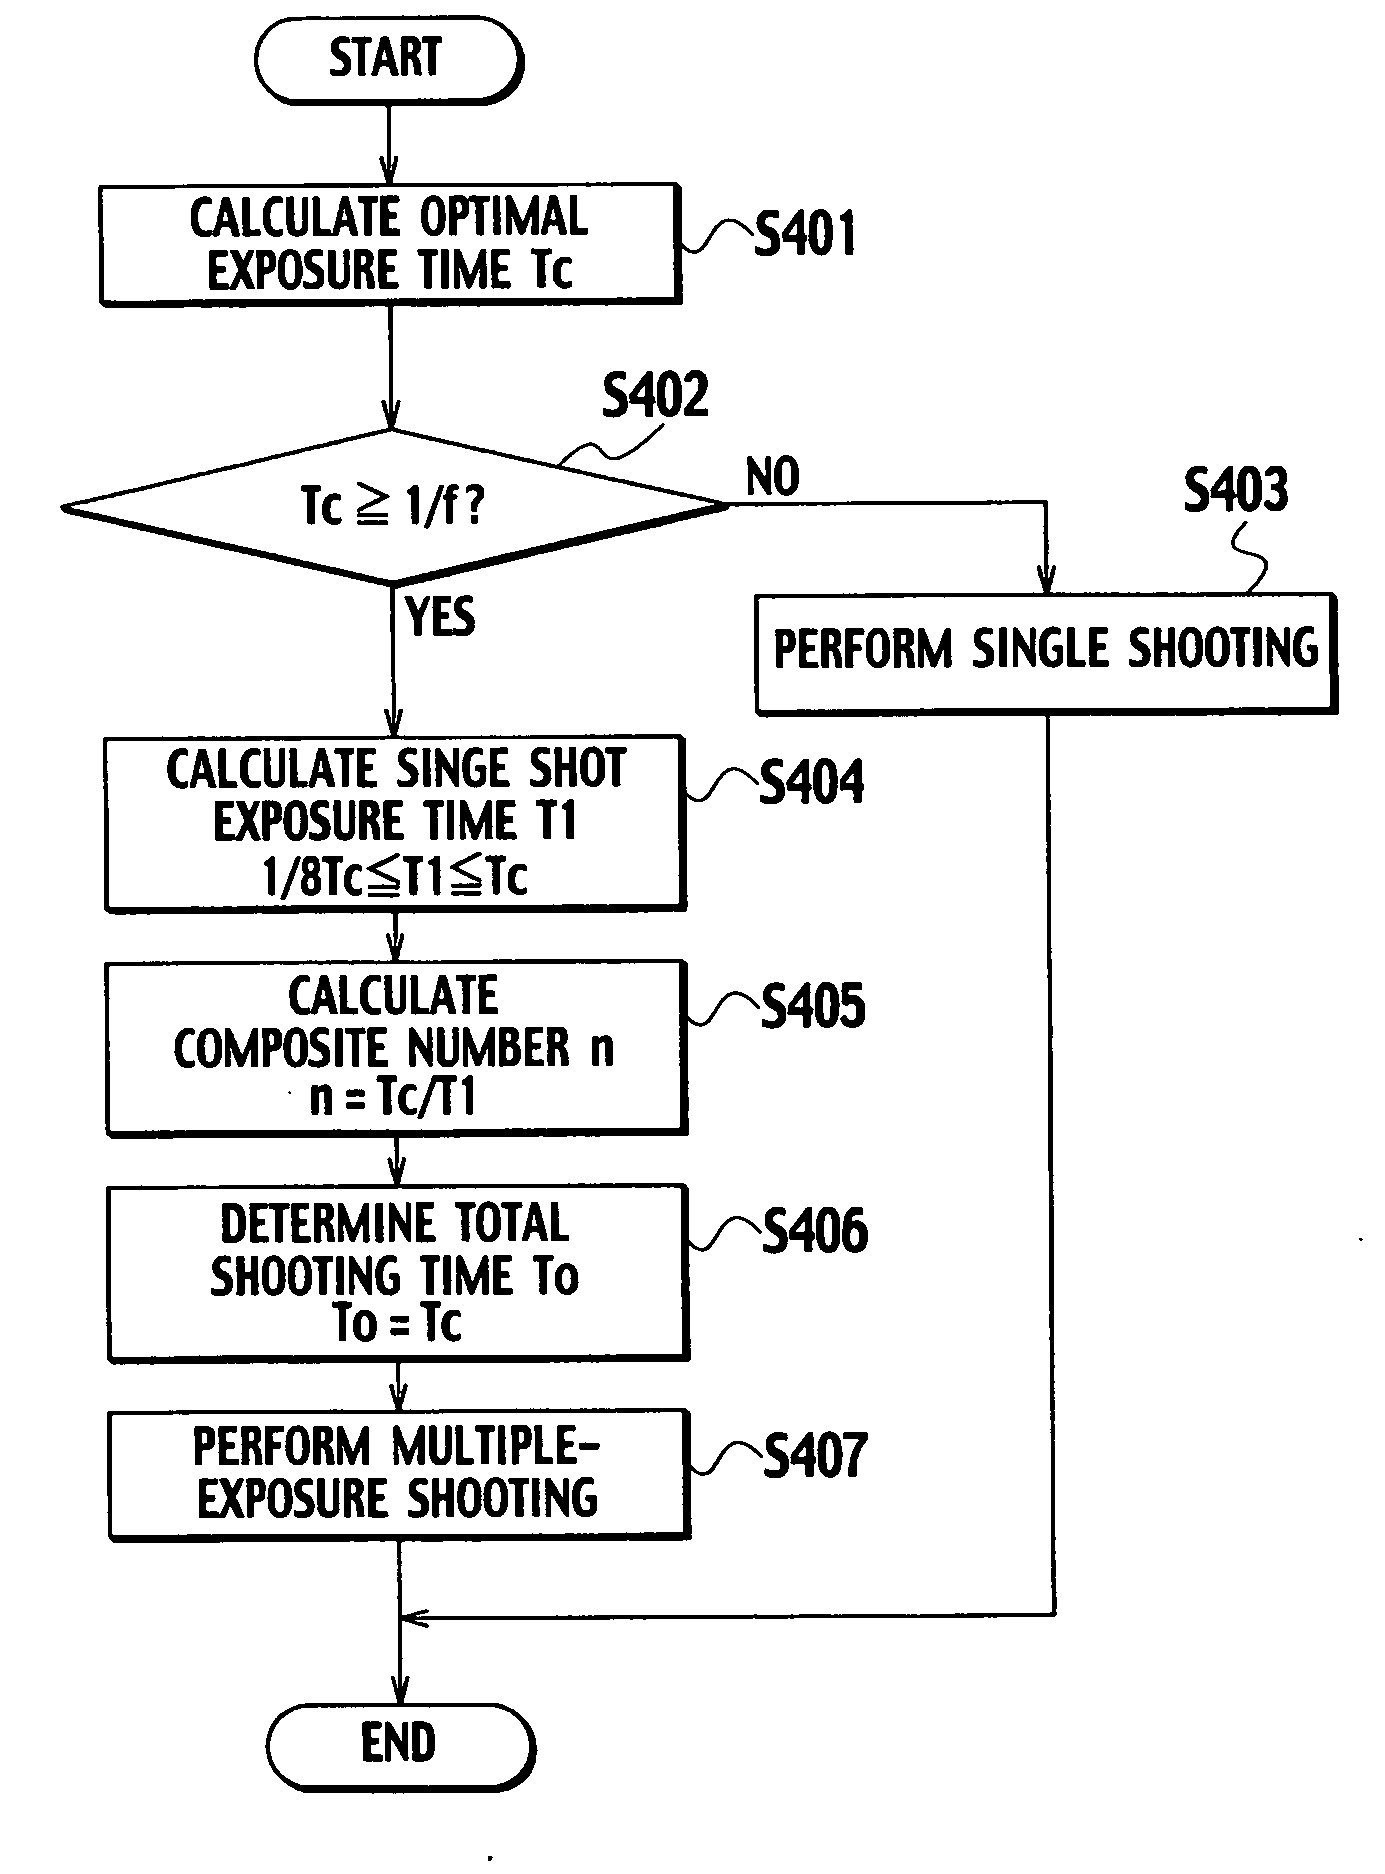 Image taking apparatus and program for multiple-exposure shooting